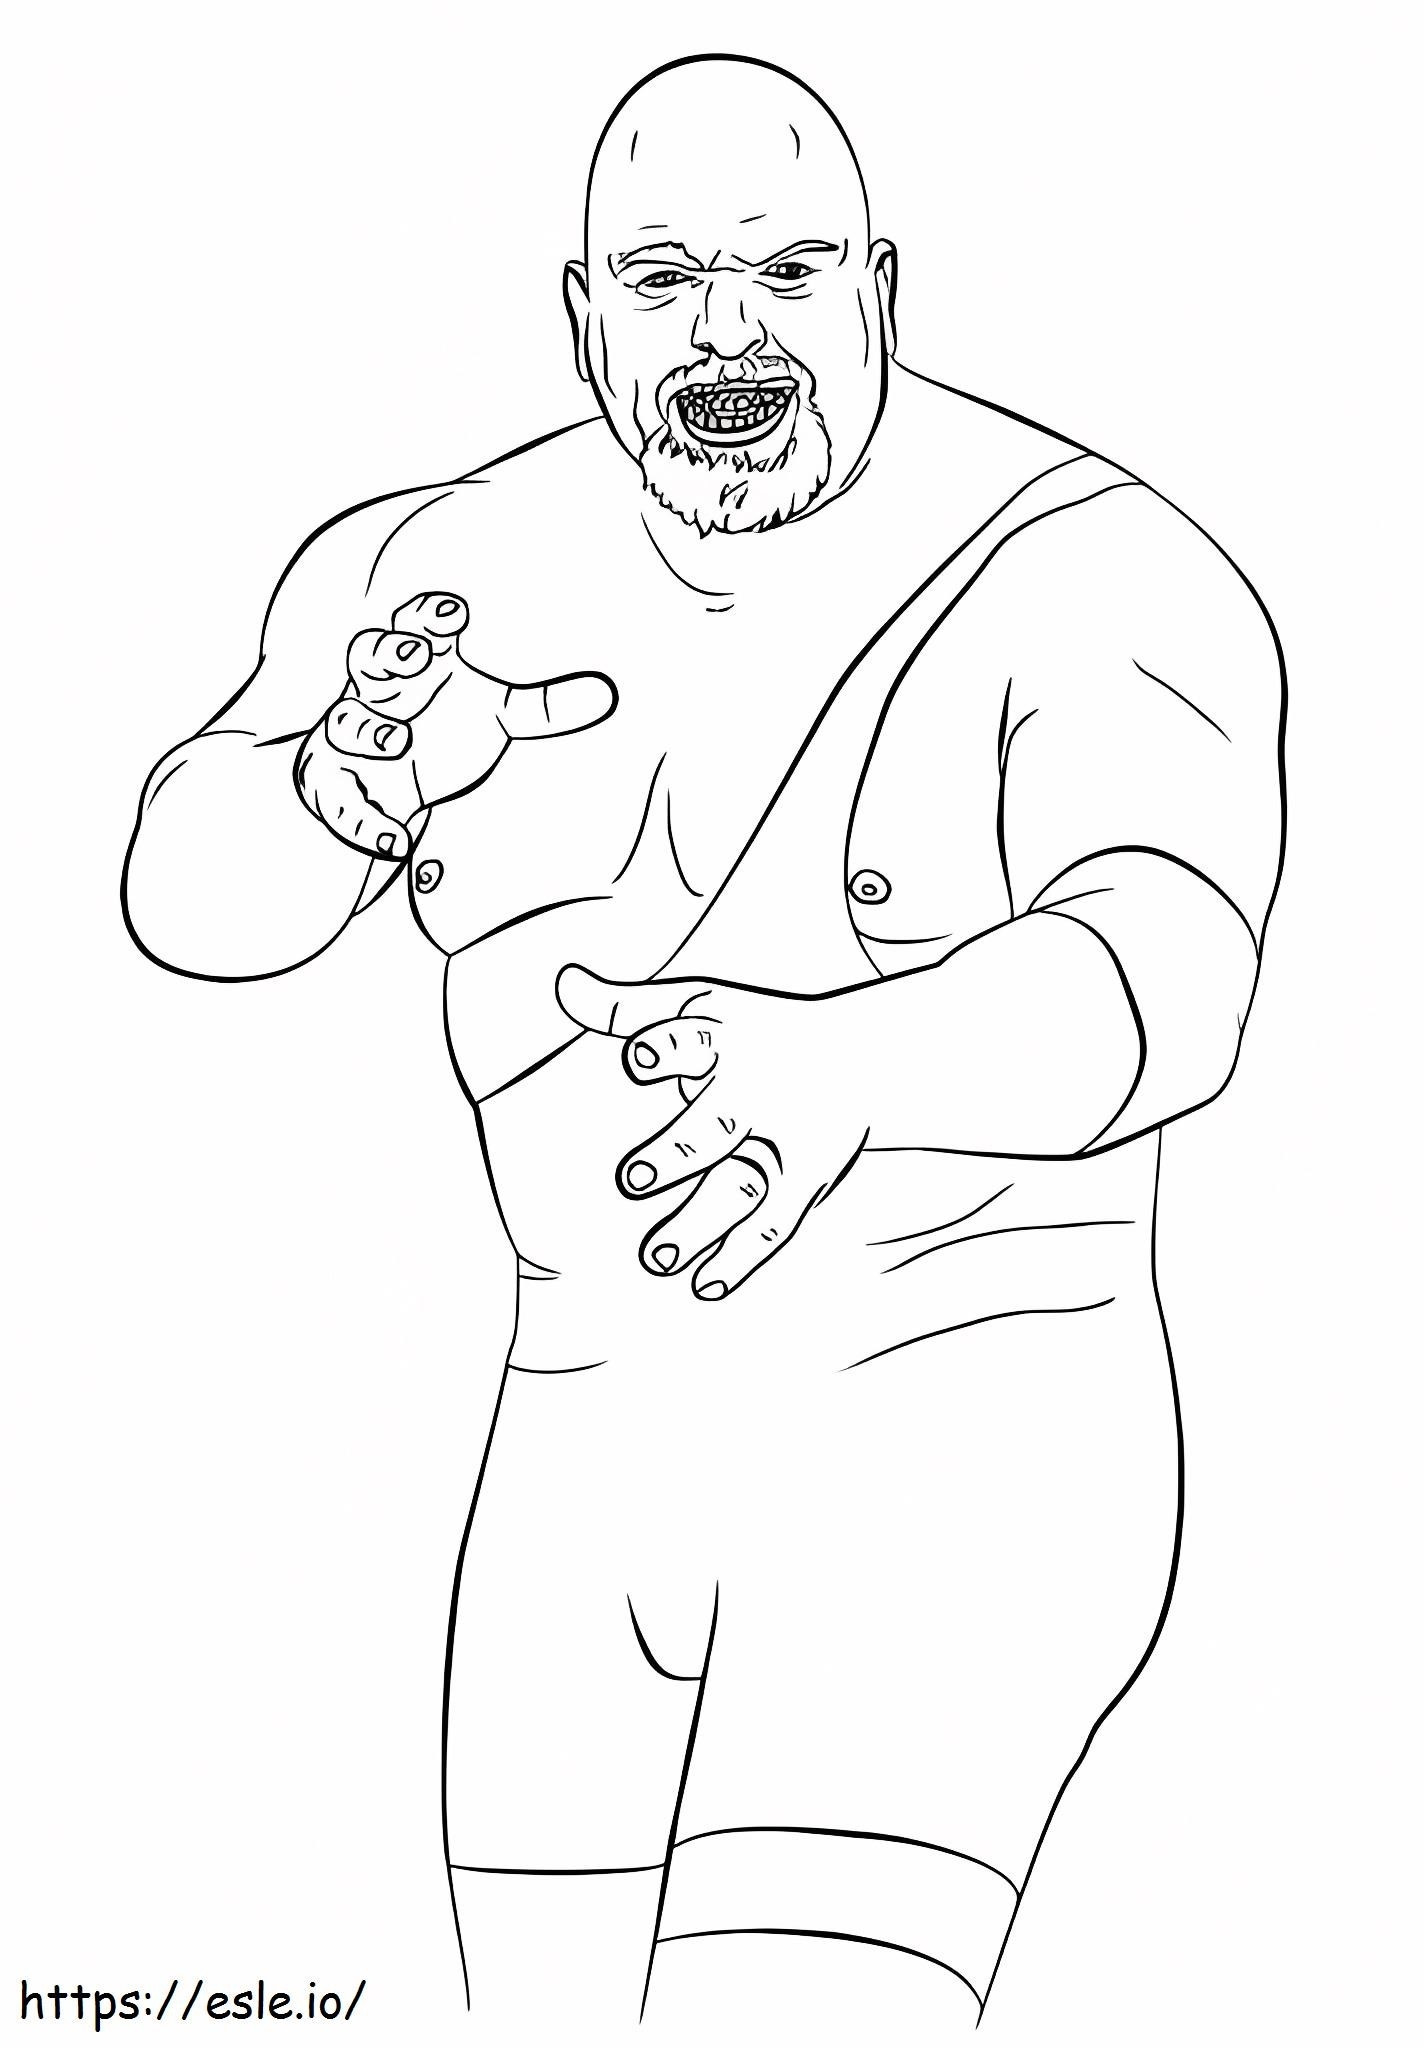 WWE The Big Show coloring page